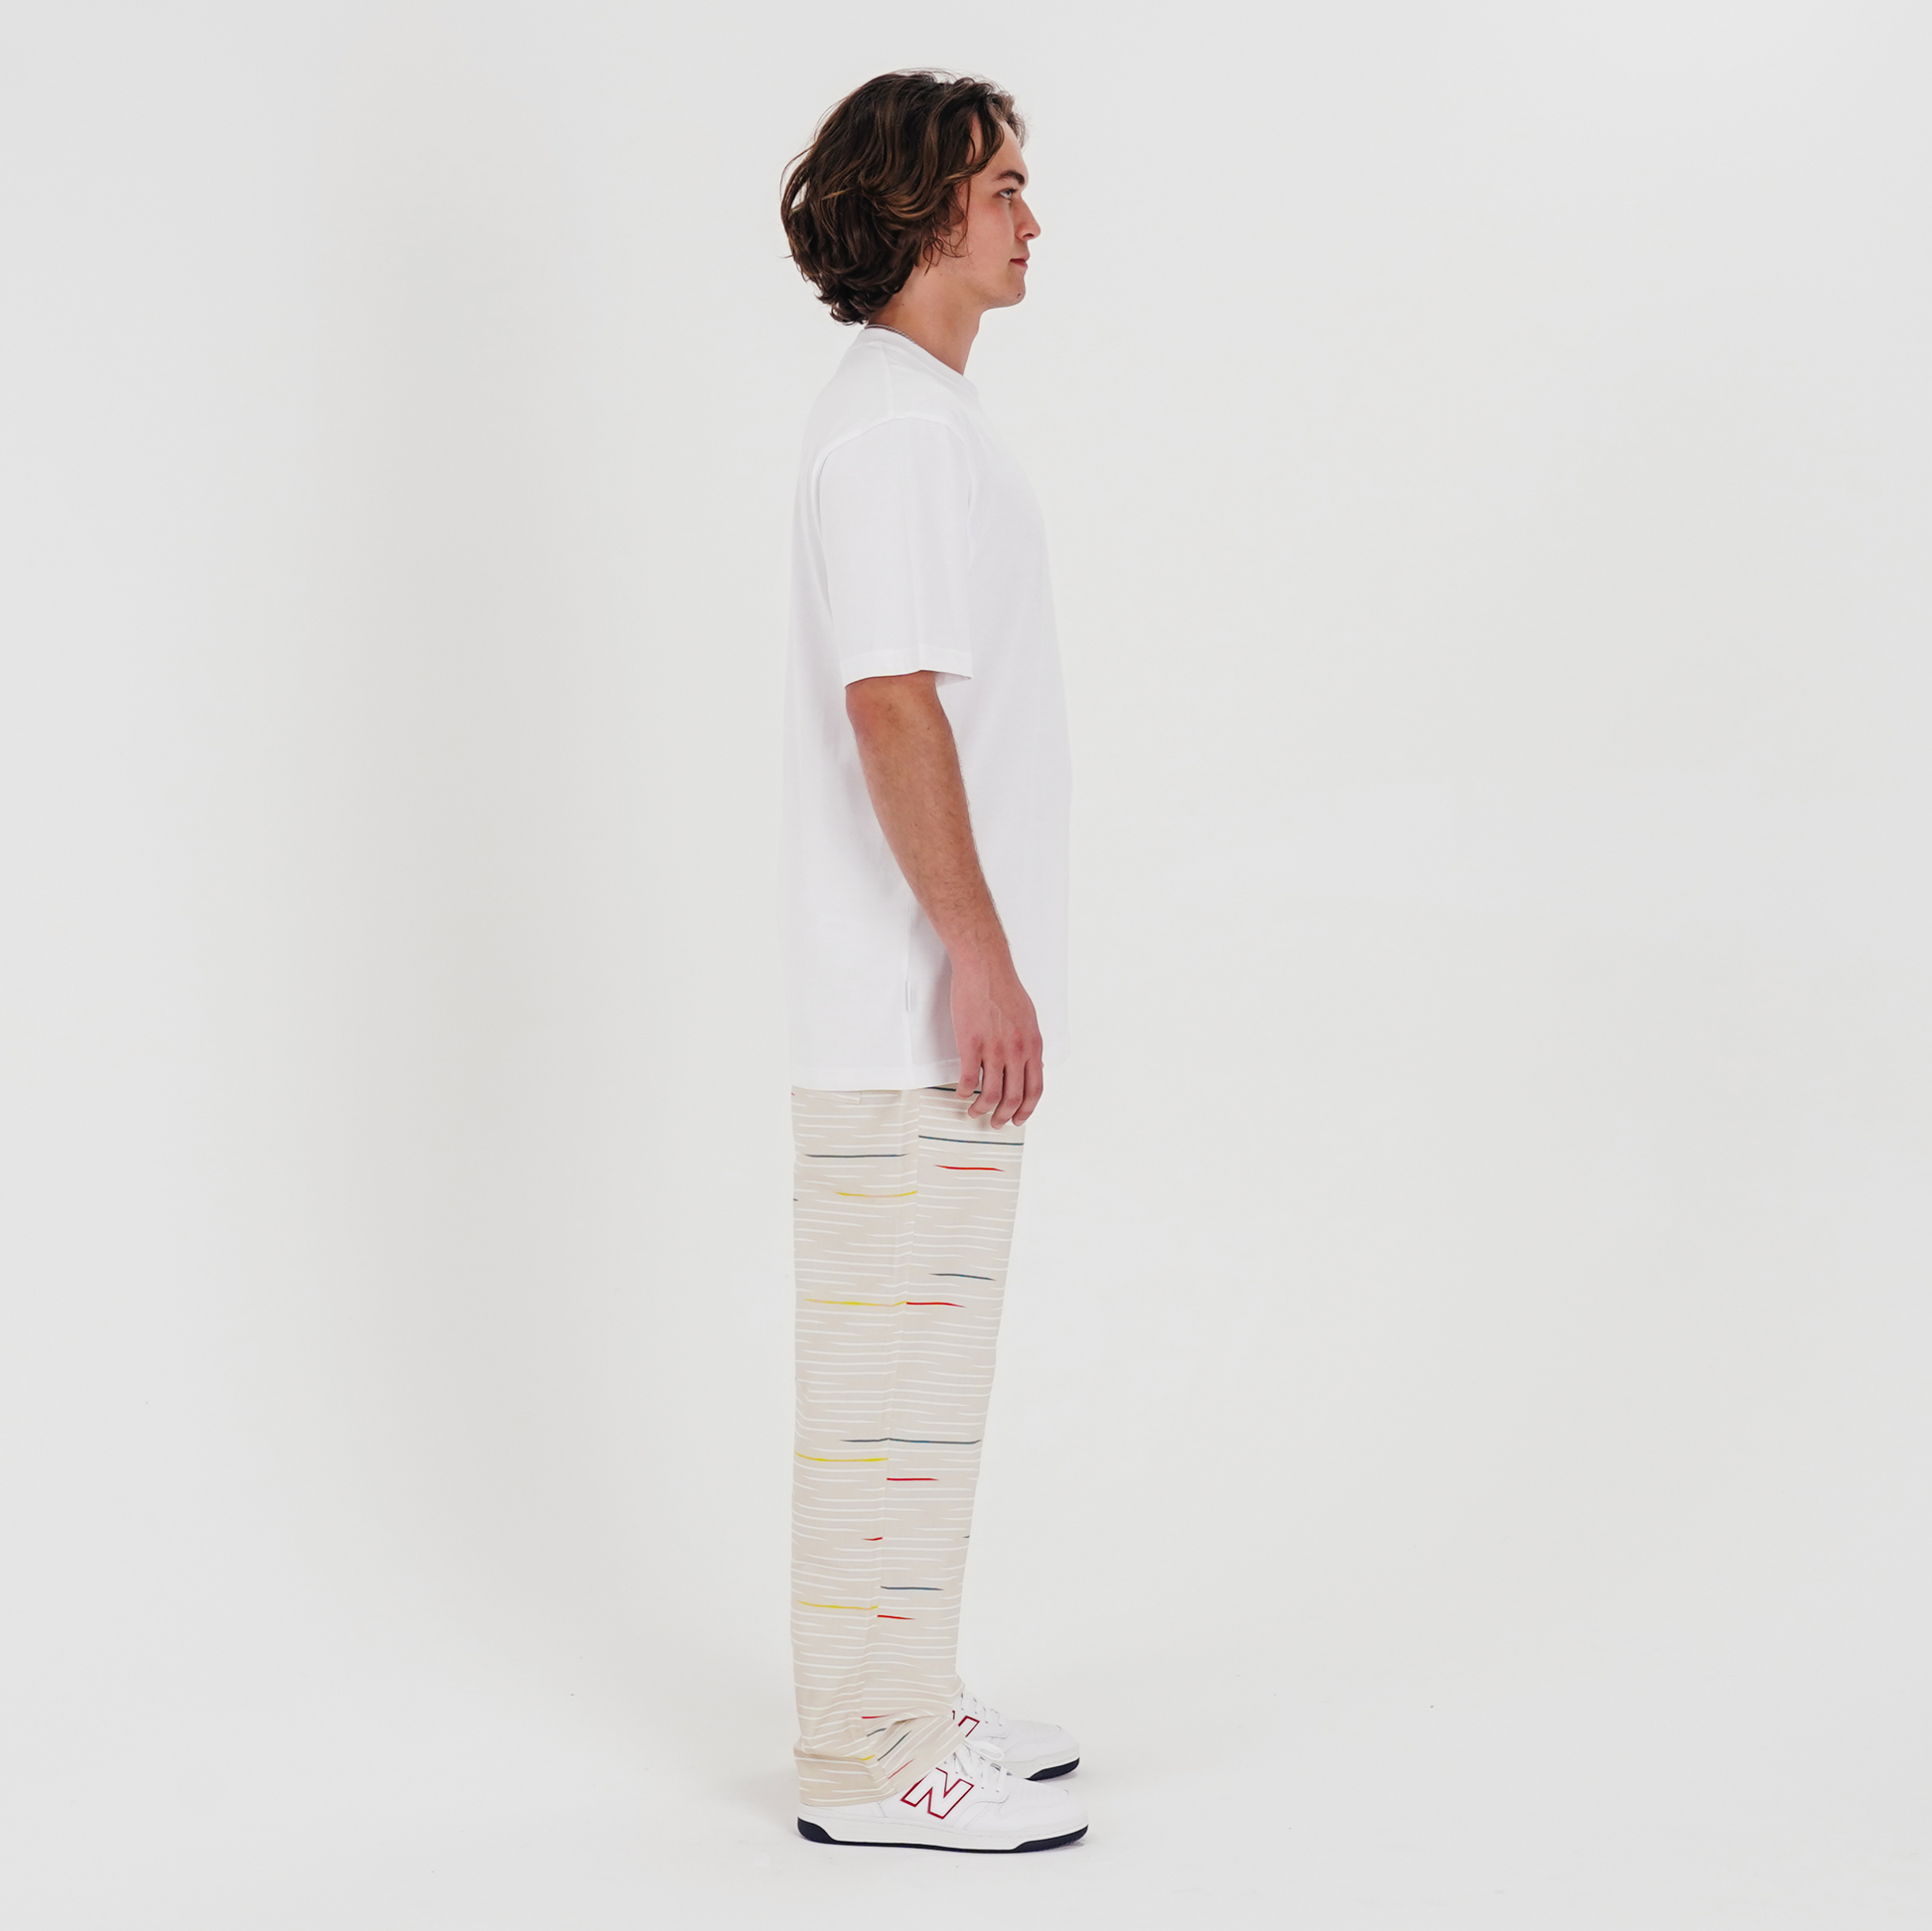 The Mens Surf Pant Printed Katouche Ecru from Parlez clothing